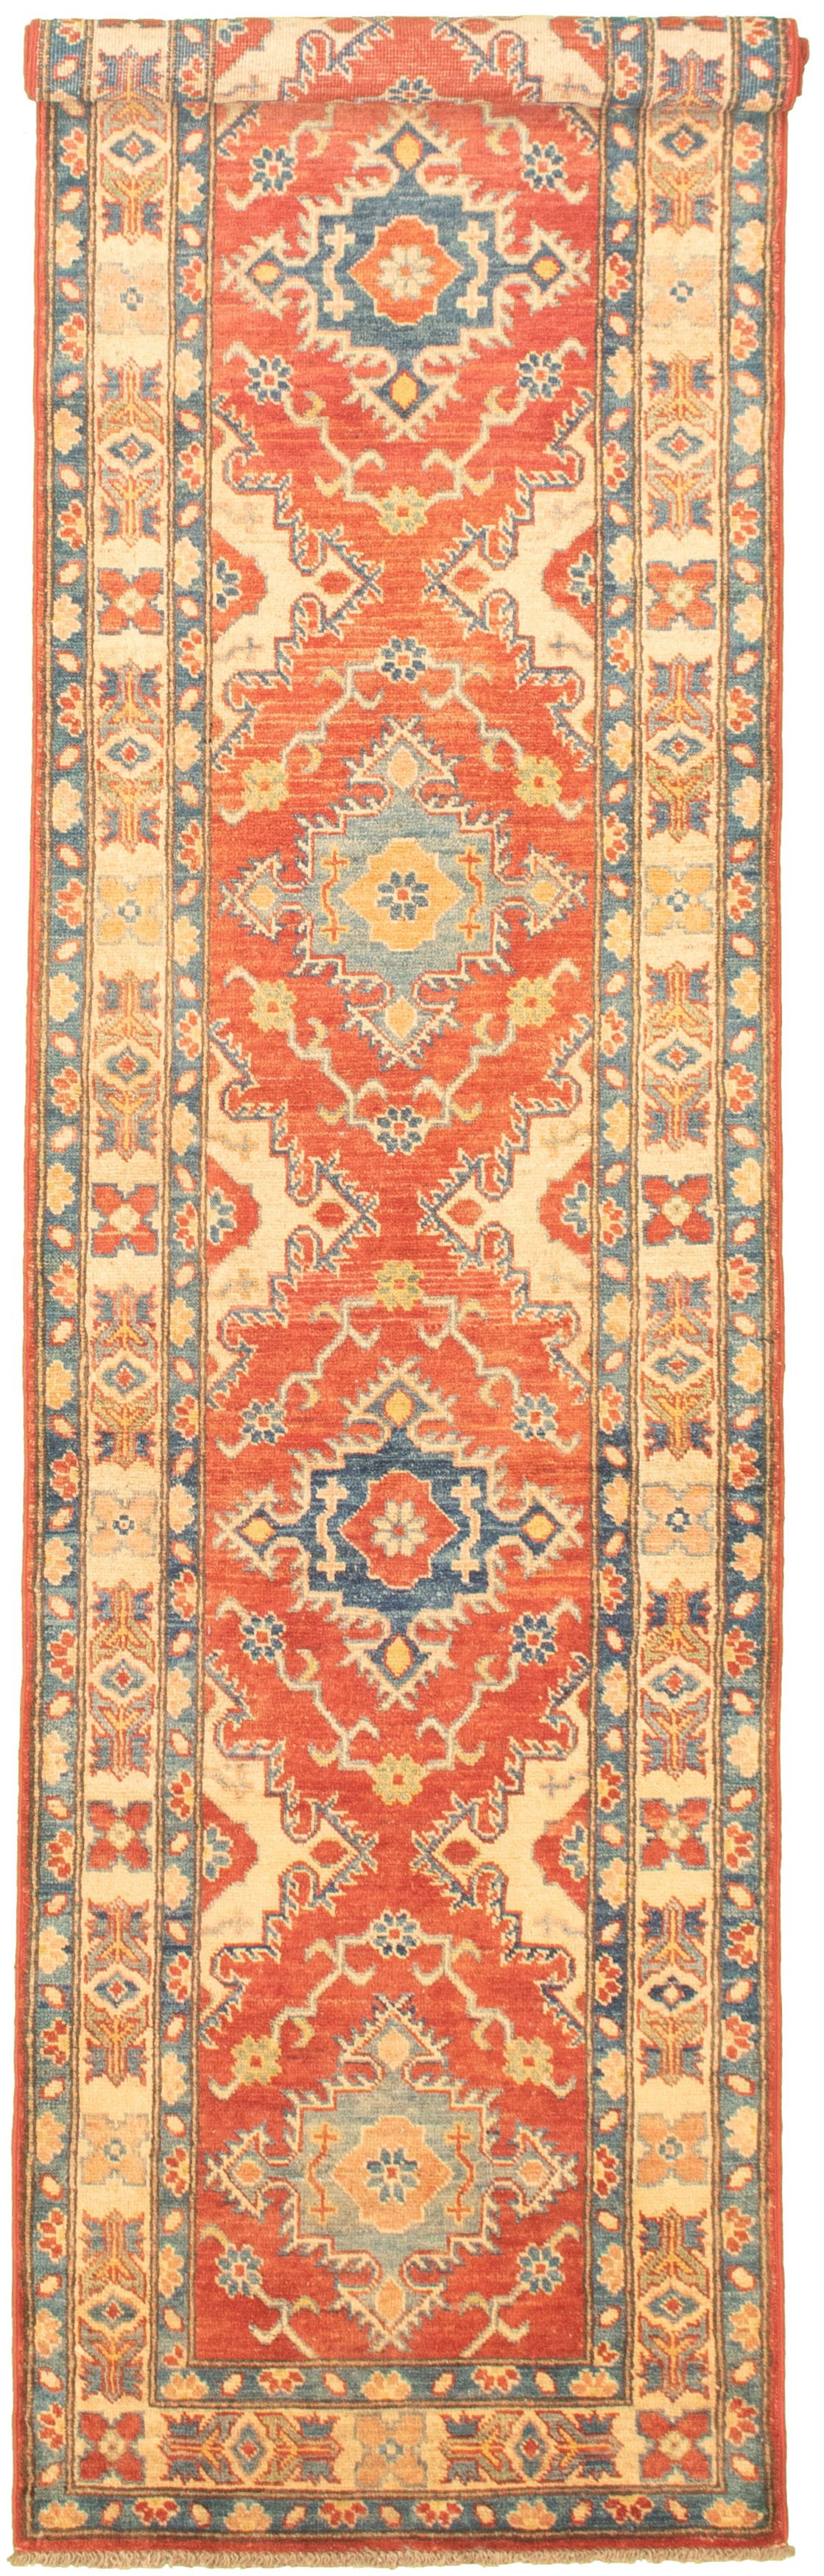 Hand-knotted Finest Gazni Red Wool Rug 2'7" x 11'2" Size: 2'7" x 11'2"  